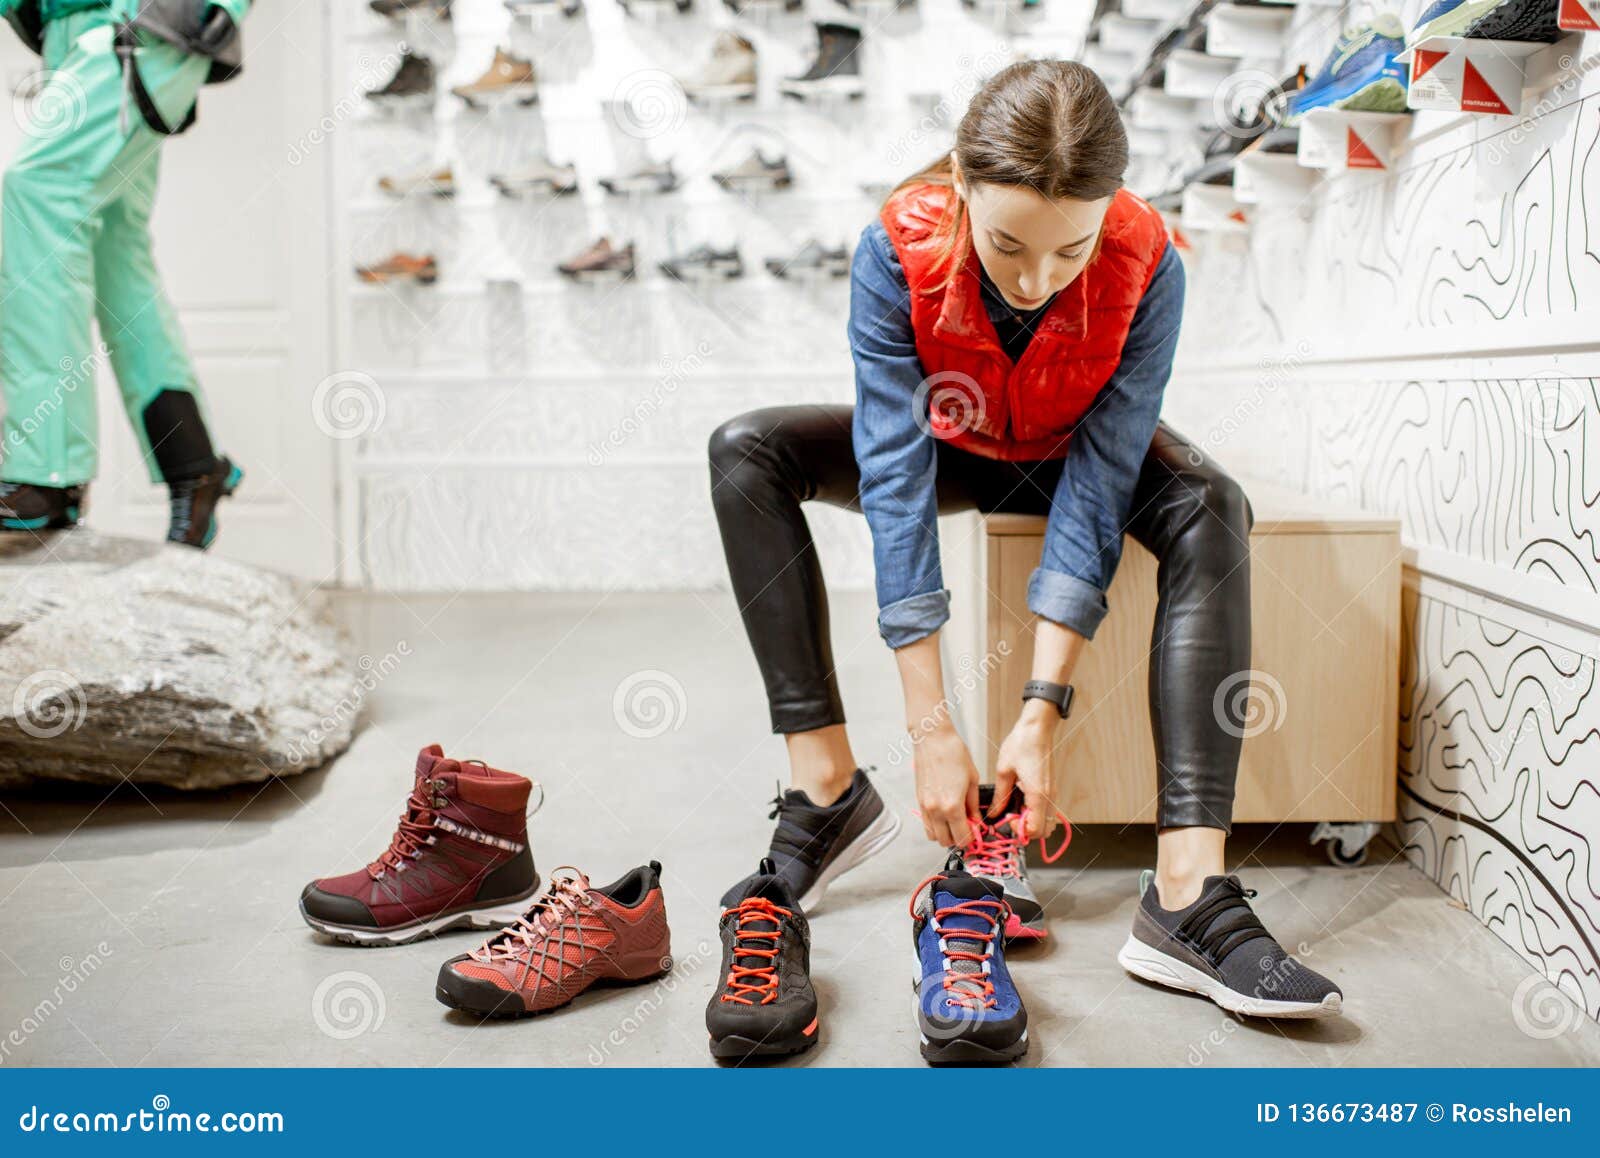 Woman Trying Shoes for Hiking in the Shop Stock - Image of